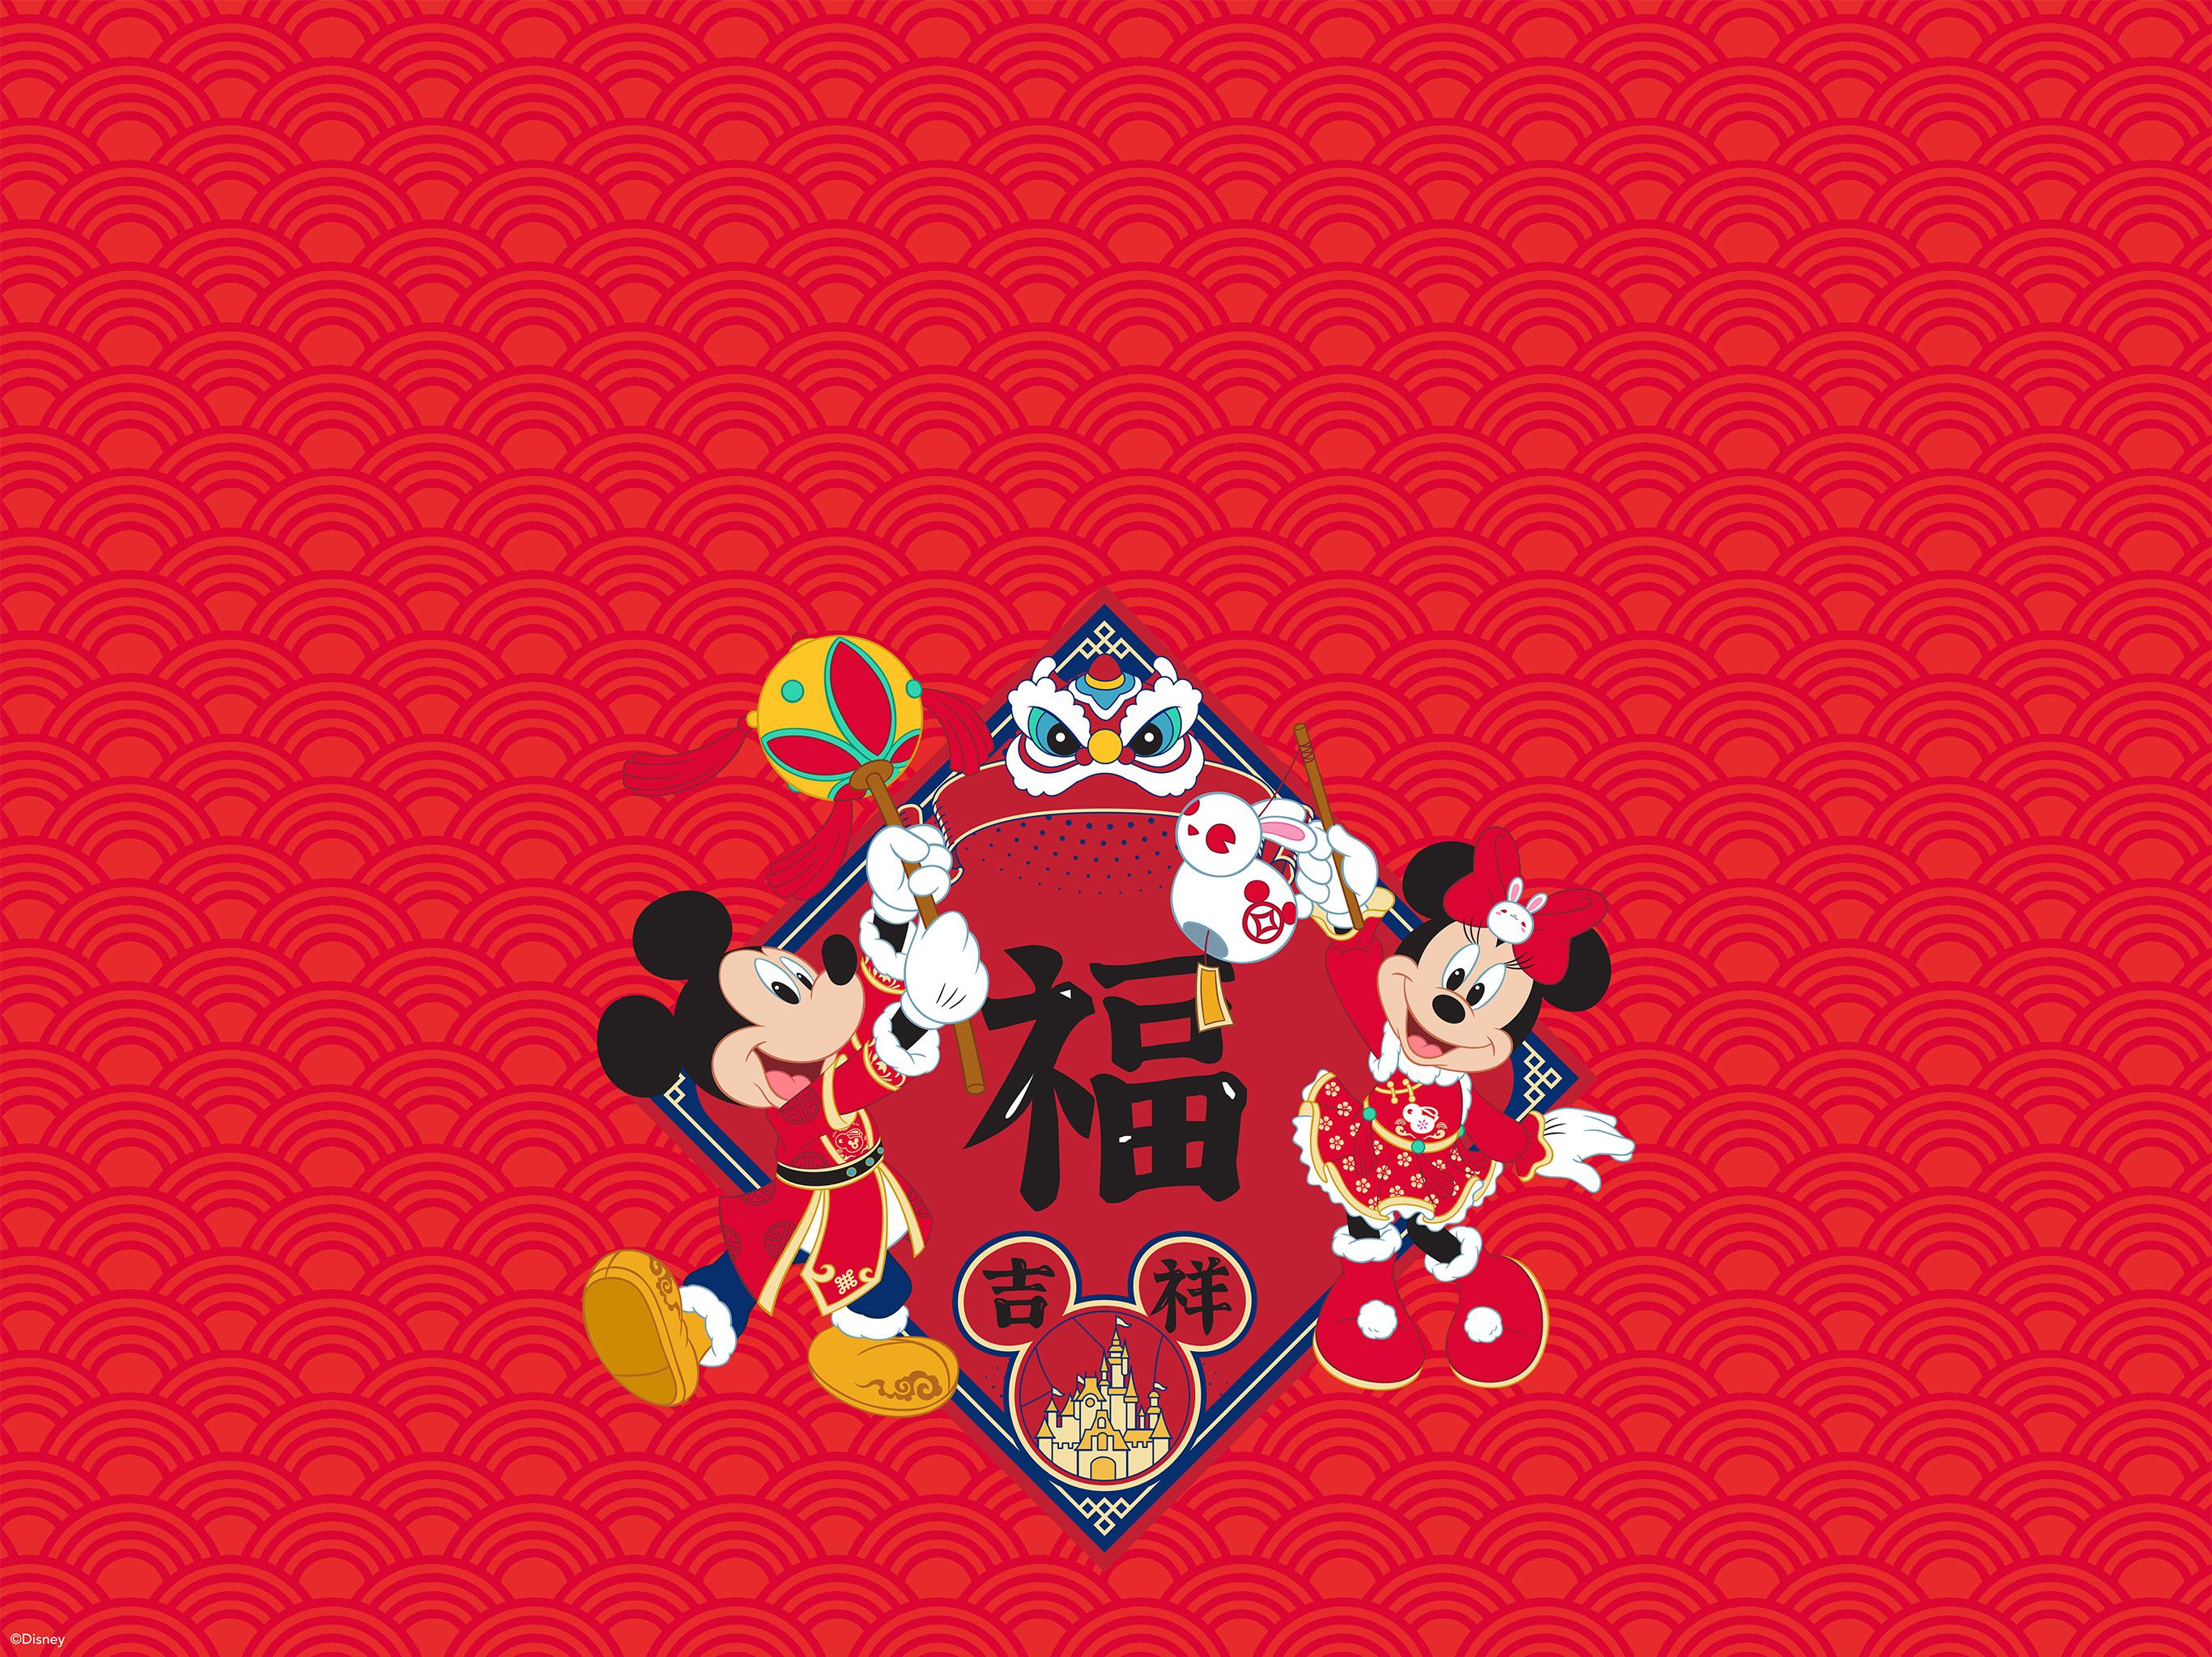 Happy Lunar New Year With Mickey Mouse And Minnie